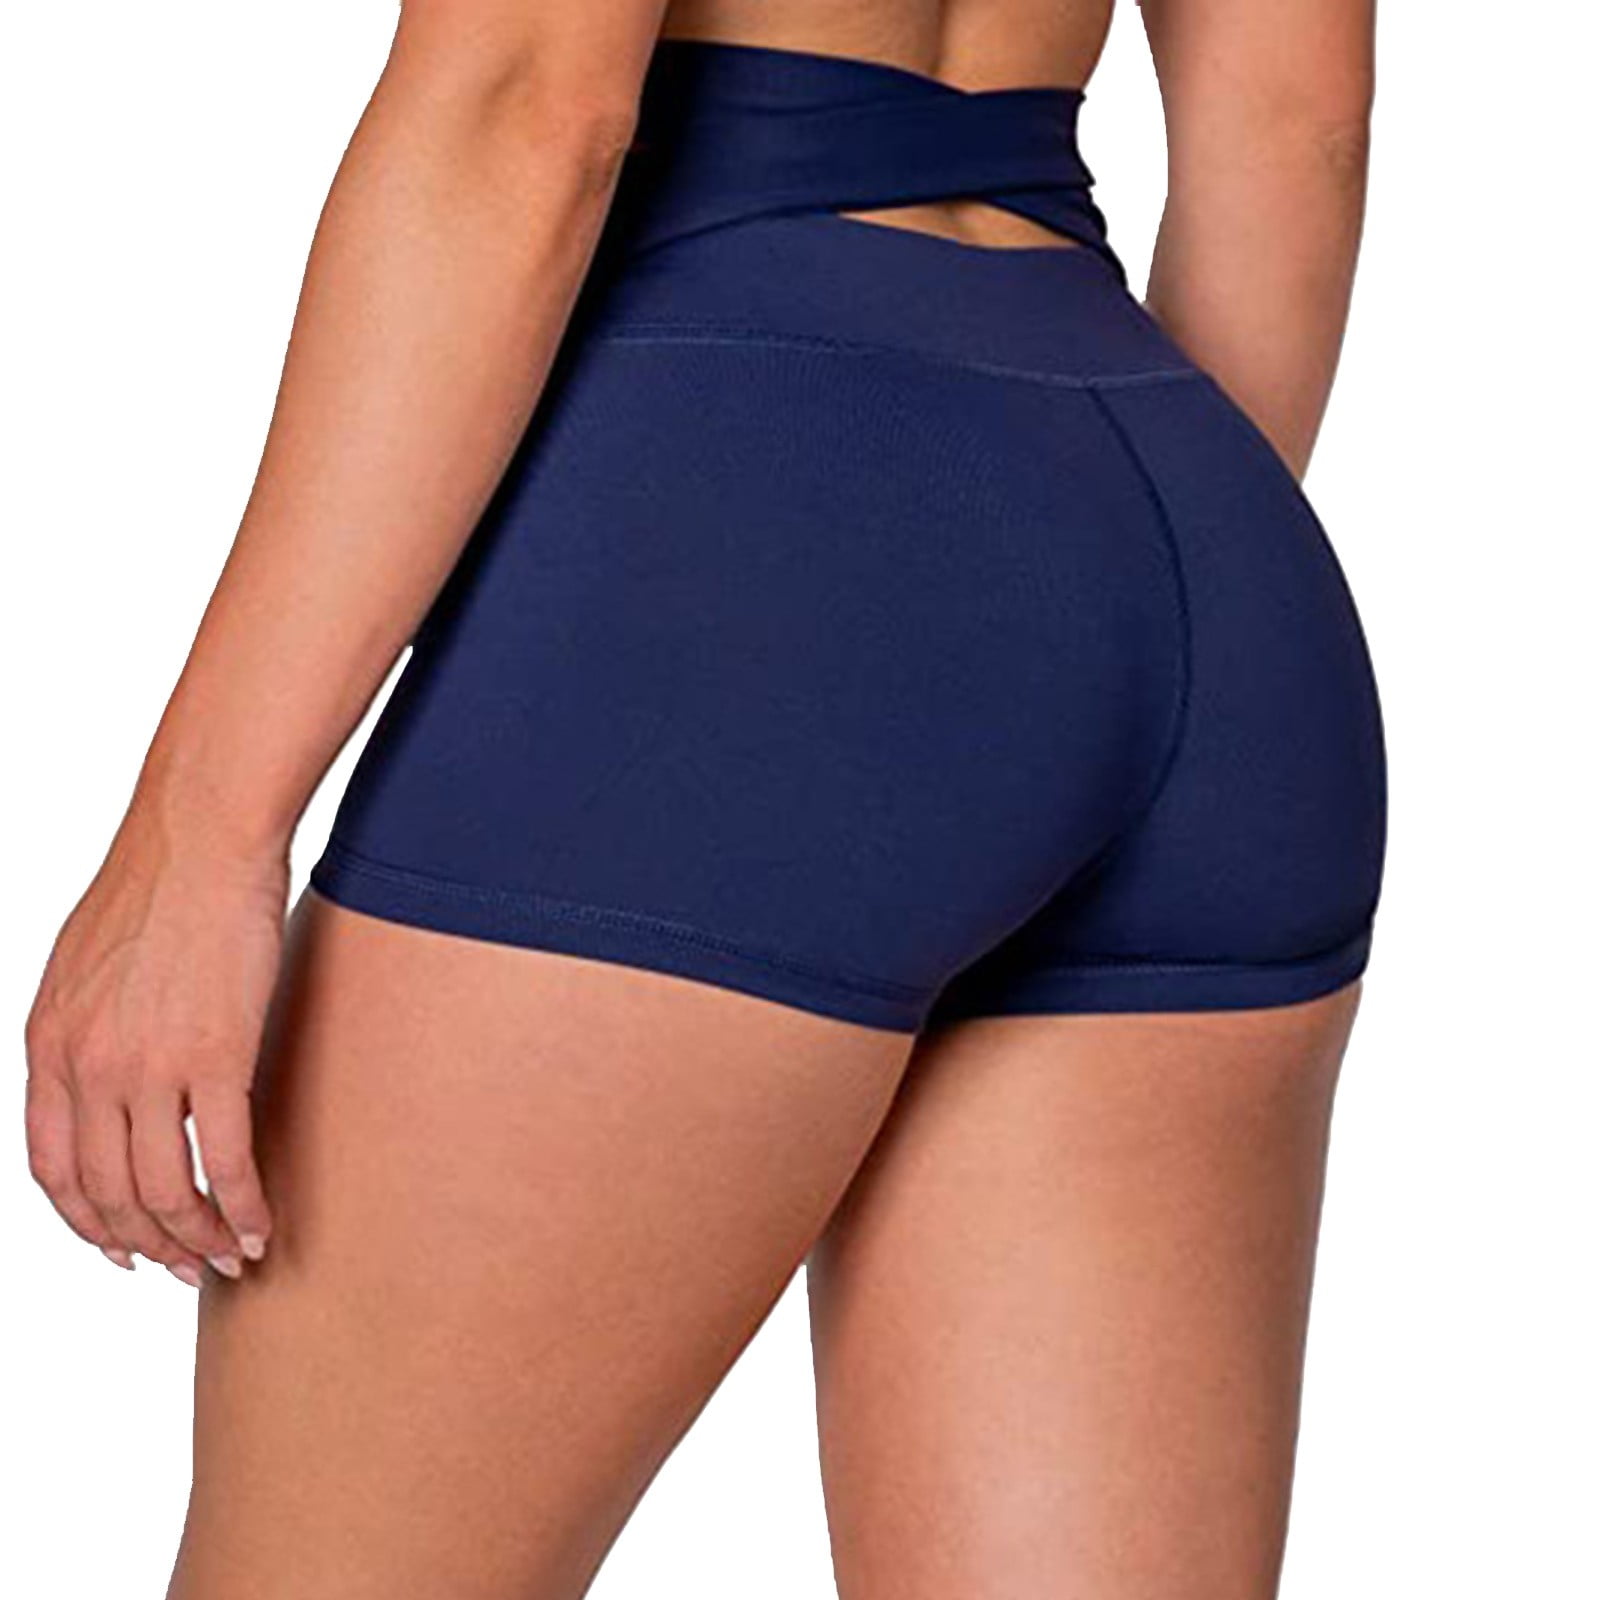 BSDHBS Gym Shorts Women's Back Waist Strap High Waist Tight Fitness Solid  Color Stretch Yoga Pants 